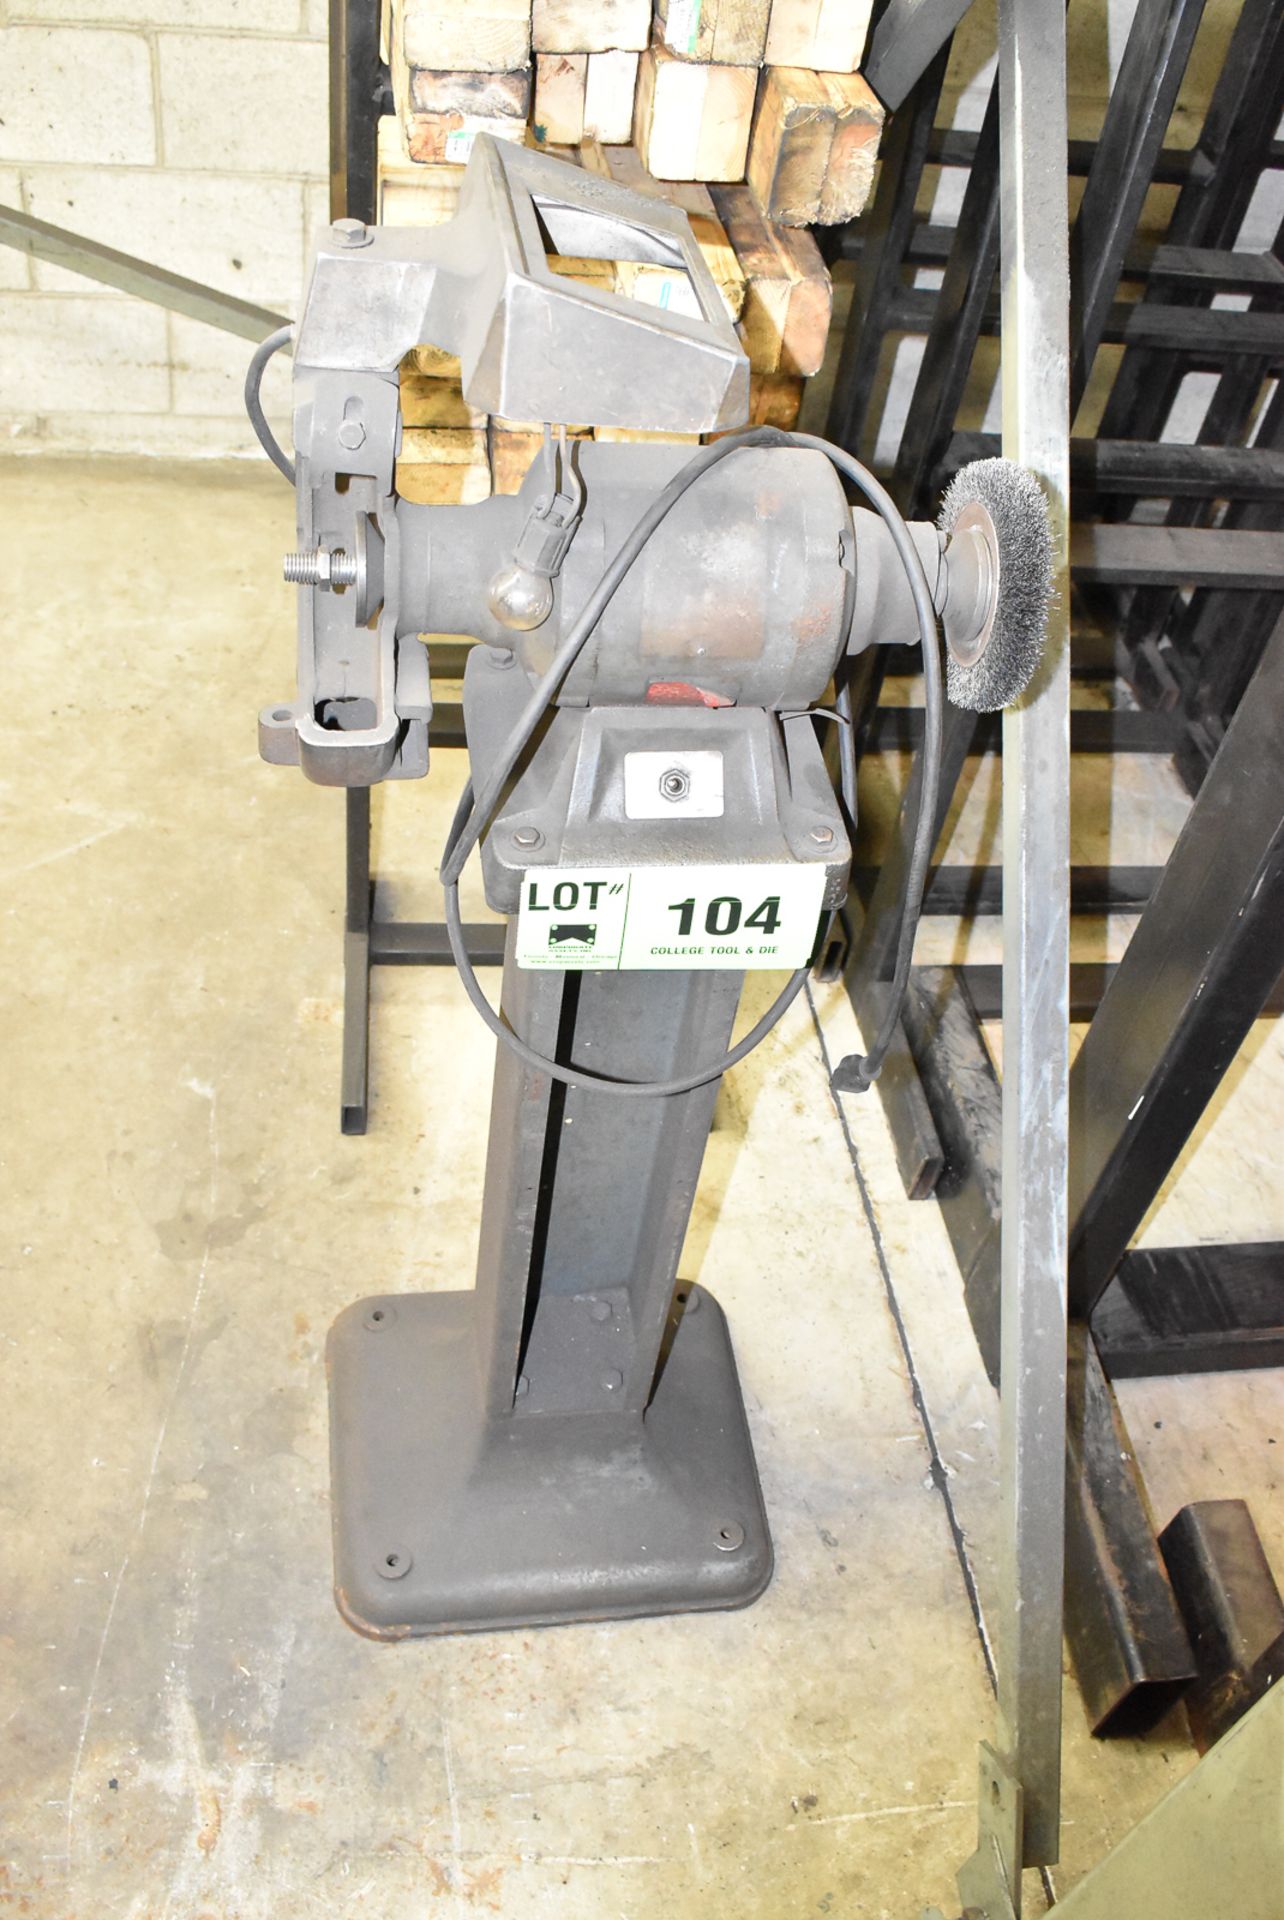 DOUBLE END PEDESTAL GRINDER - [RIGGING FEE FOR LOT #104 - $50 CDN - PLUS TAXES]